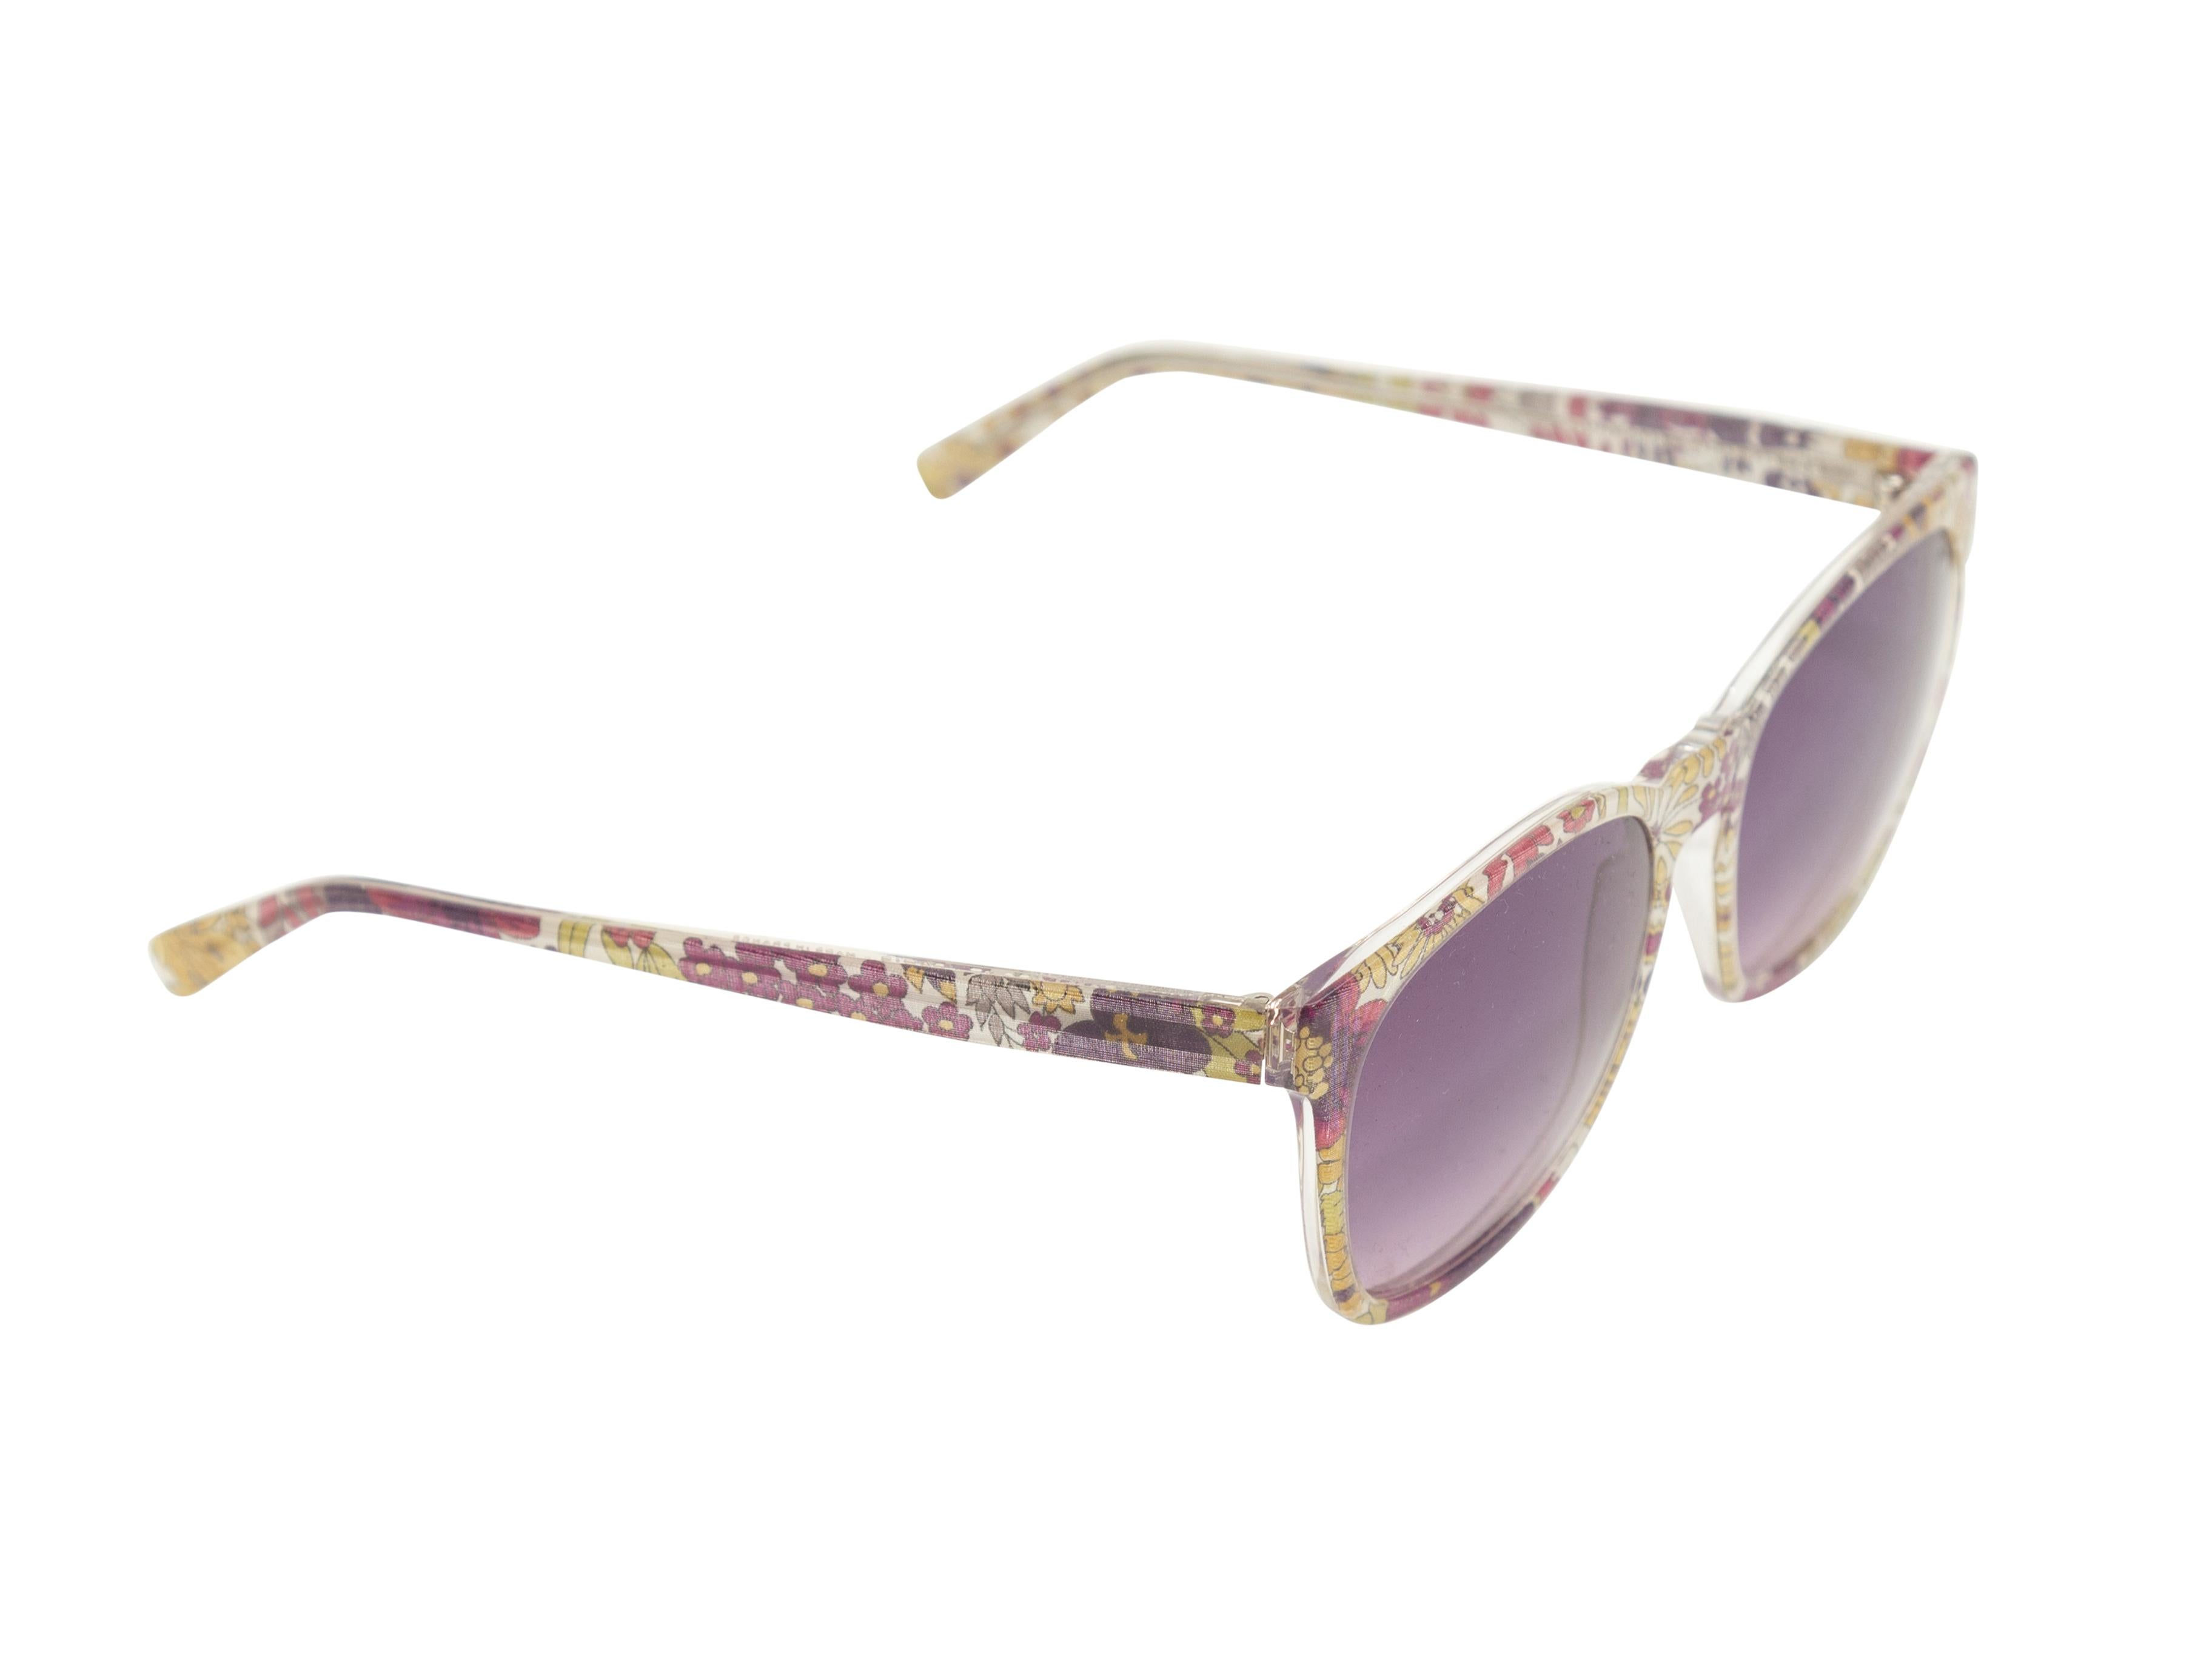 Product details: Purple, yellow, and white floral print sunglasses by Lafont. Purple tinted lenses. 2